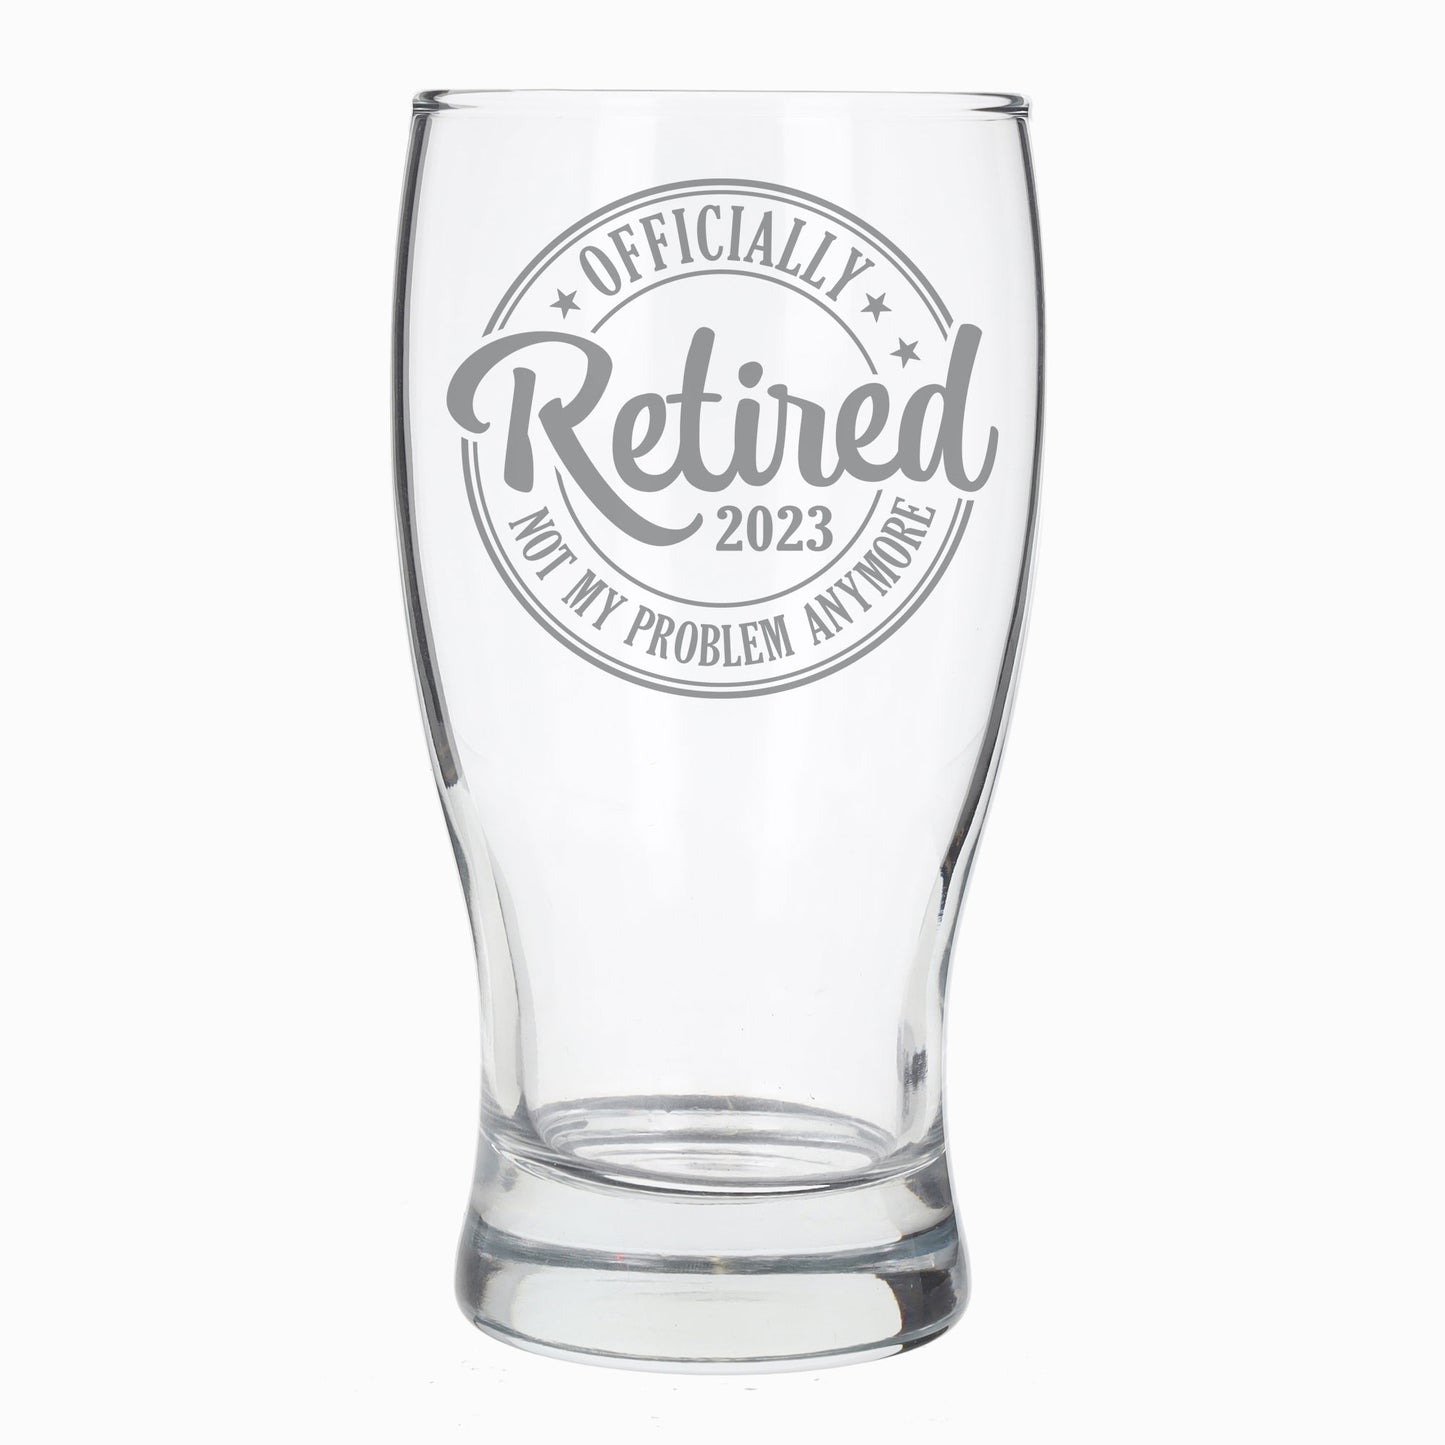 Officially Retired Engraved Beer Glass and/or Coaster Set  - Always Looking Good - Beer Glass Only  